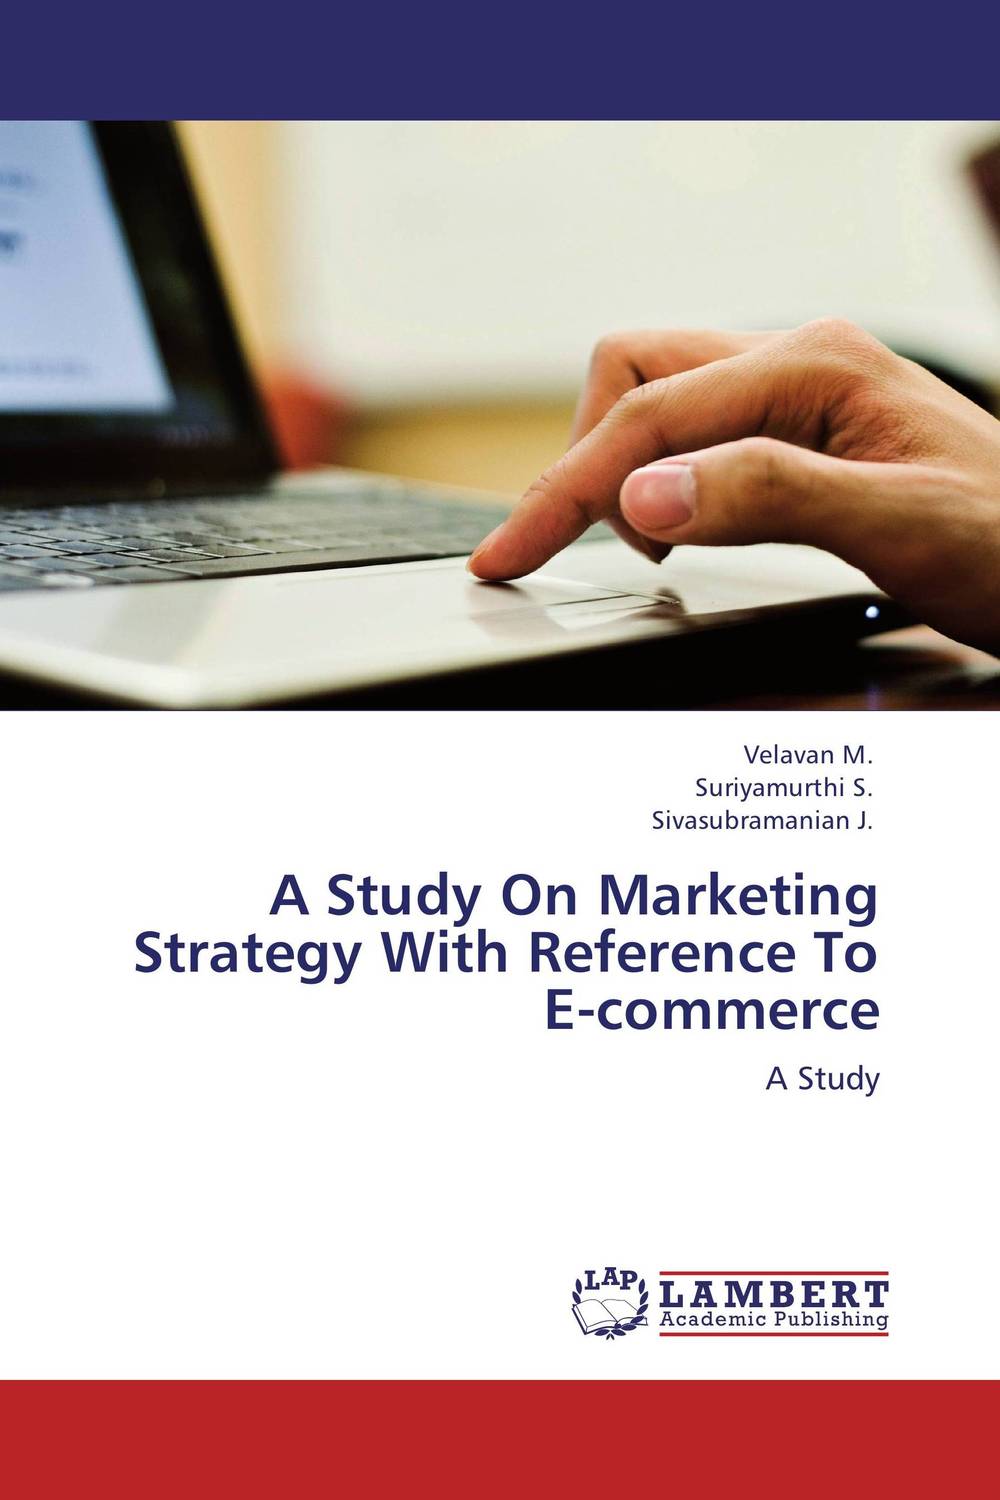 A Study On Marketing Strategy With Reference To E-commerce